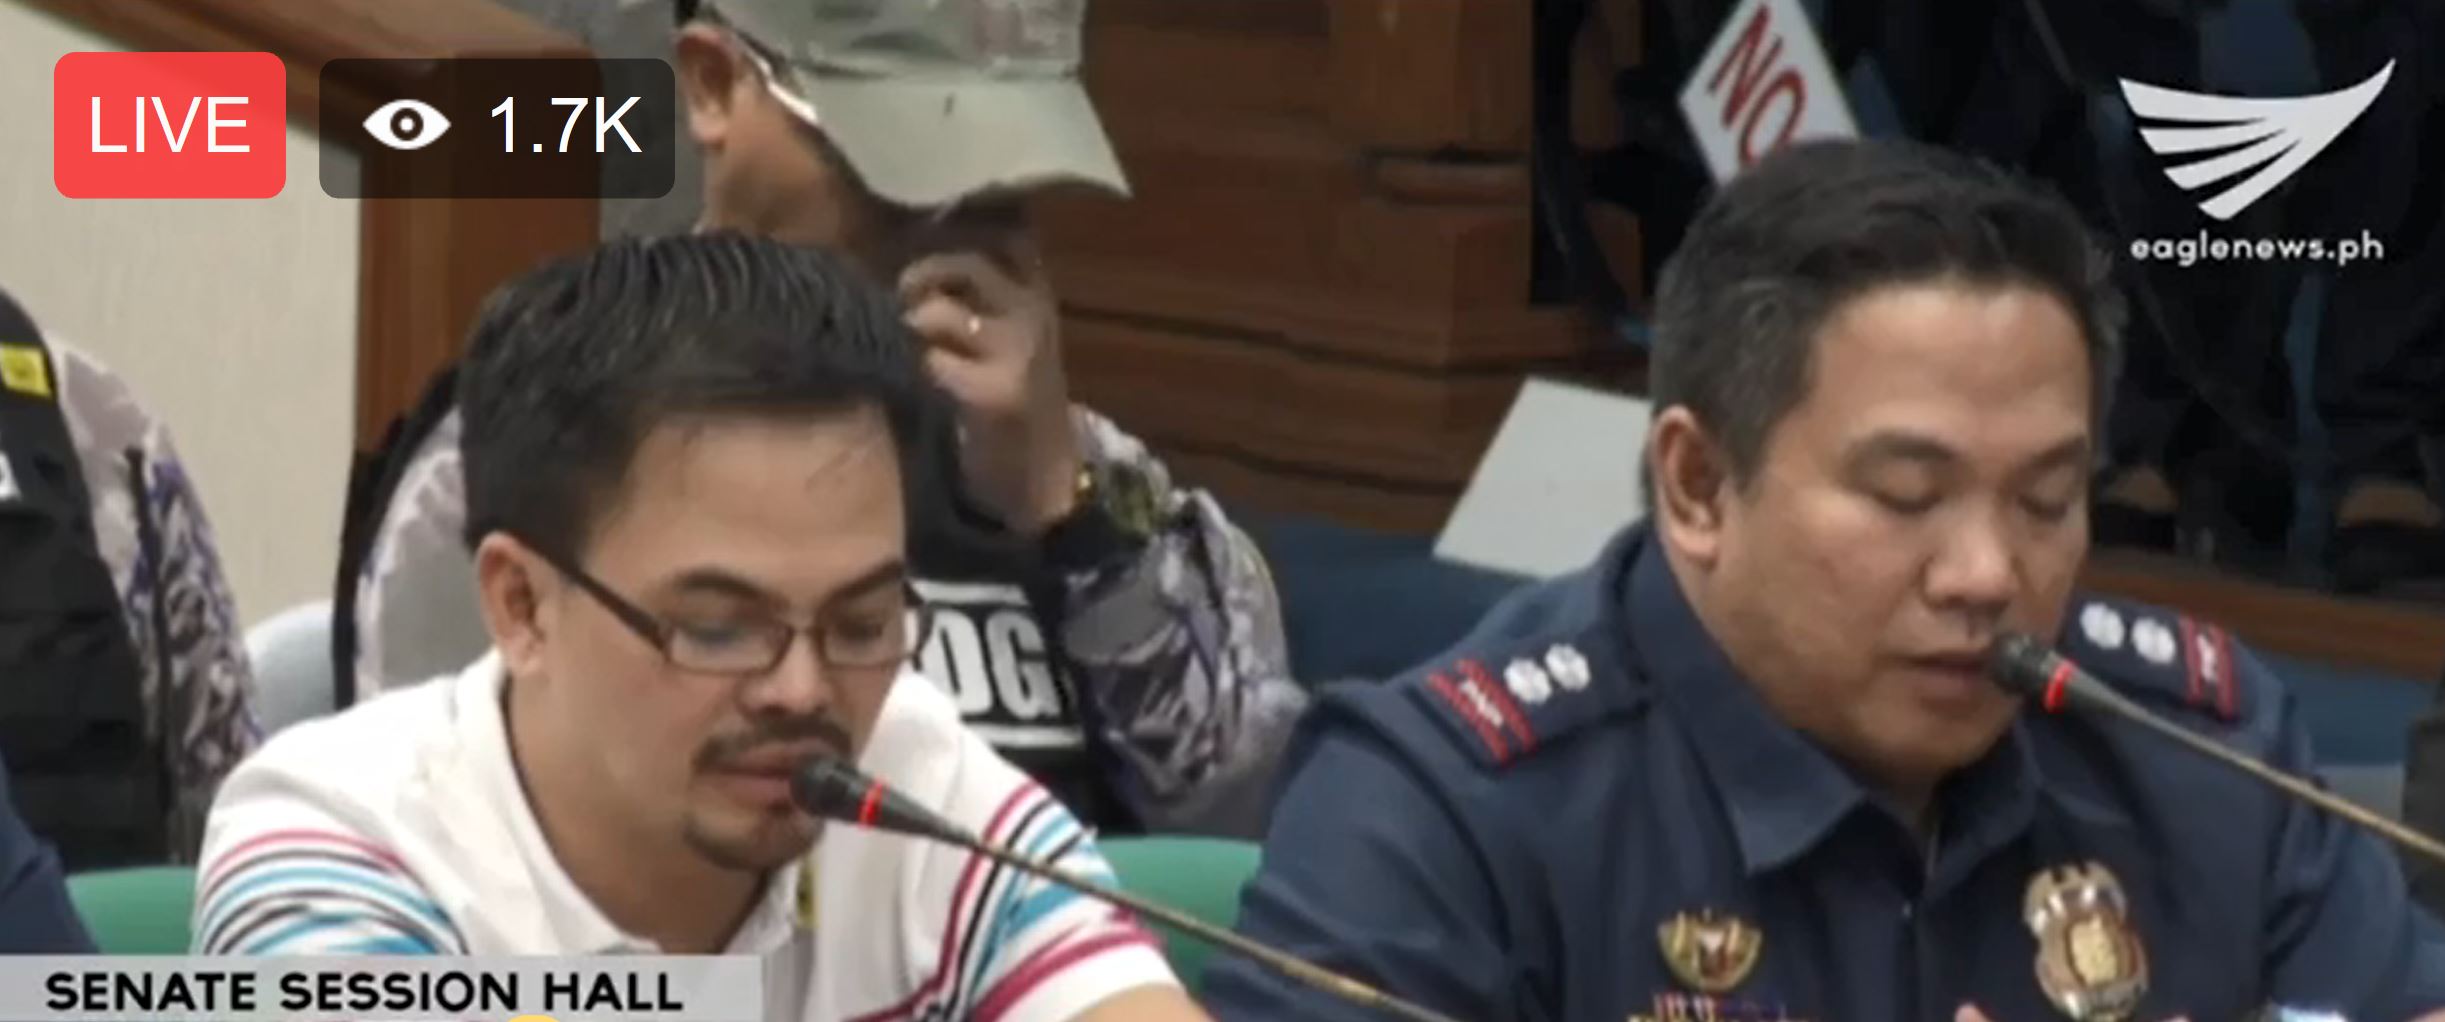 Witness and suspected big-time drug lord in Eastern Visayas Kerwin Espinosa testifies during the senate hearing on Wednesday, November 23, 2016. (Eagle News Service)